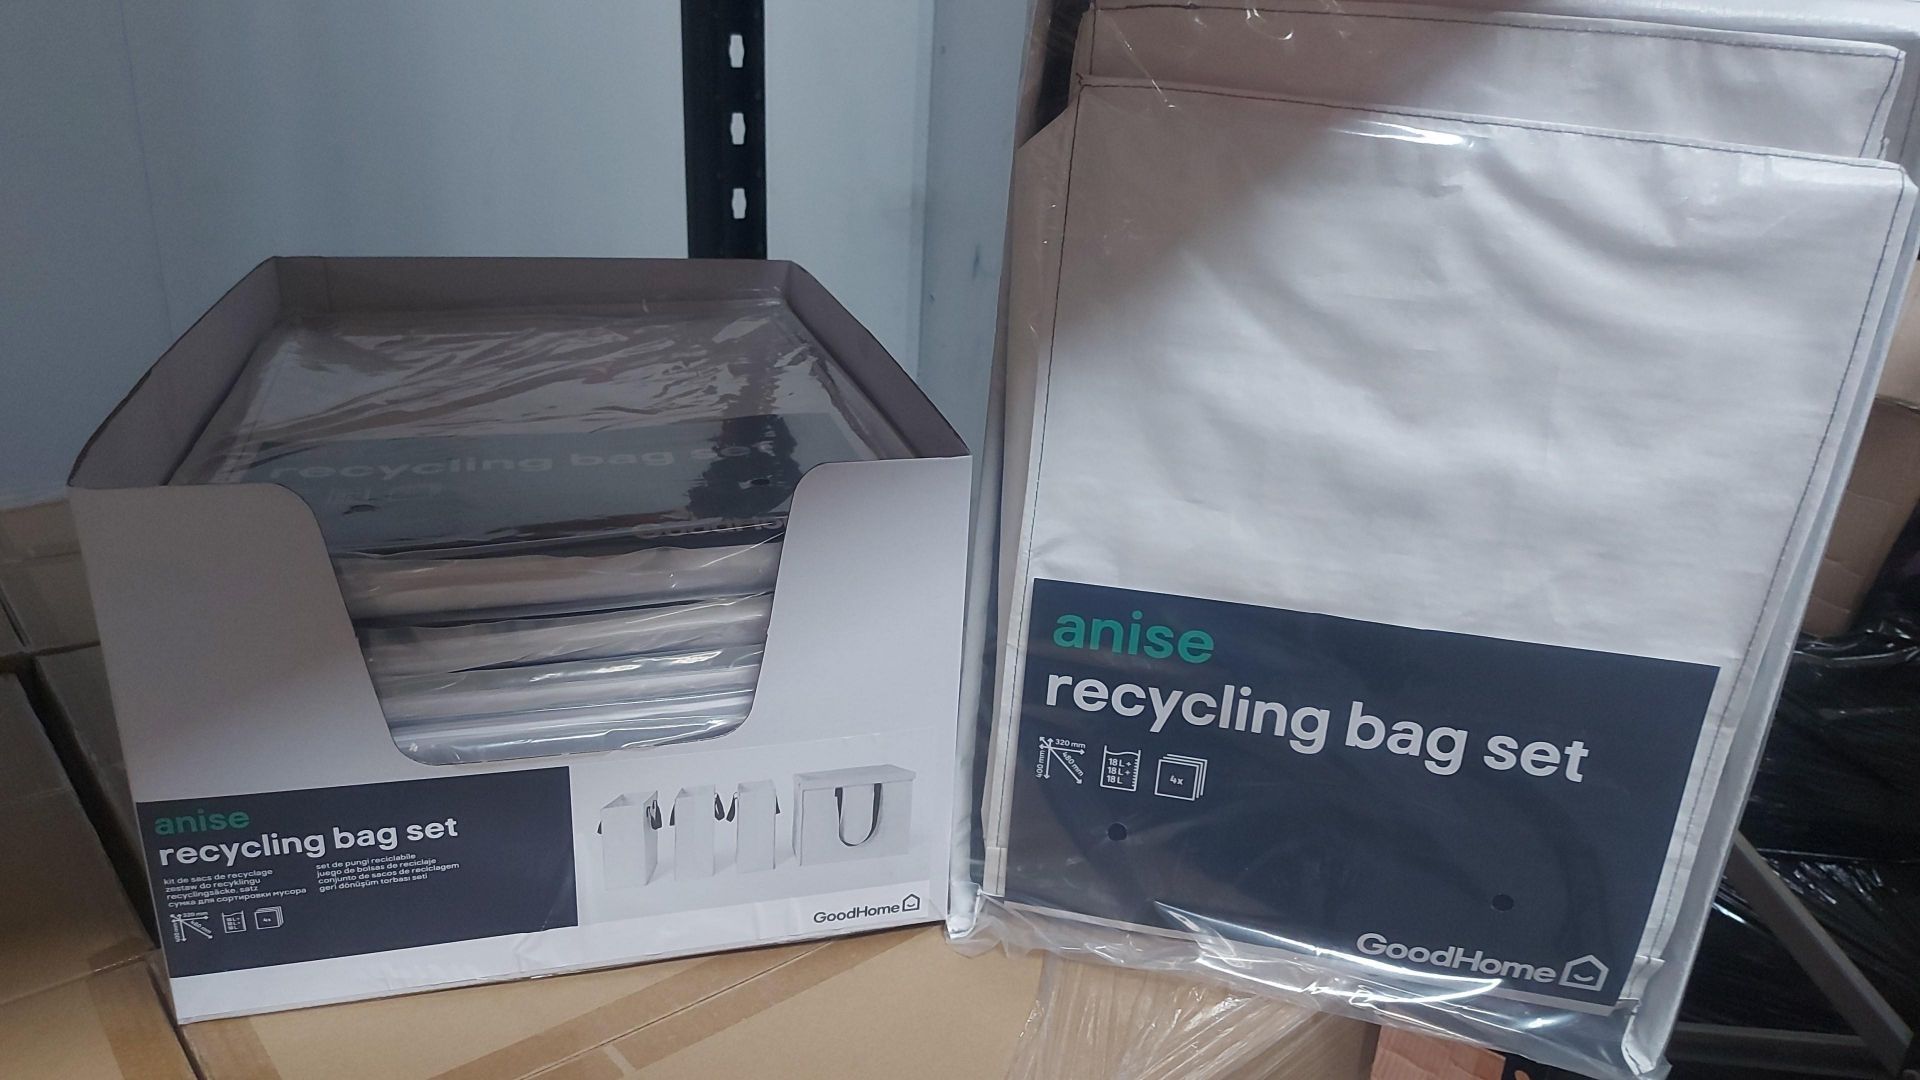 36 X NEW PACKAGED SETS OF 4 NISE RECYCLING BAG SETS. INCLUDES 3 X 18L HEAVY DUTY BAGS AND AN EXTRA